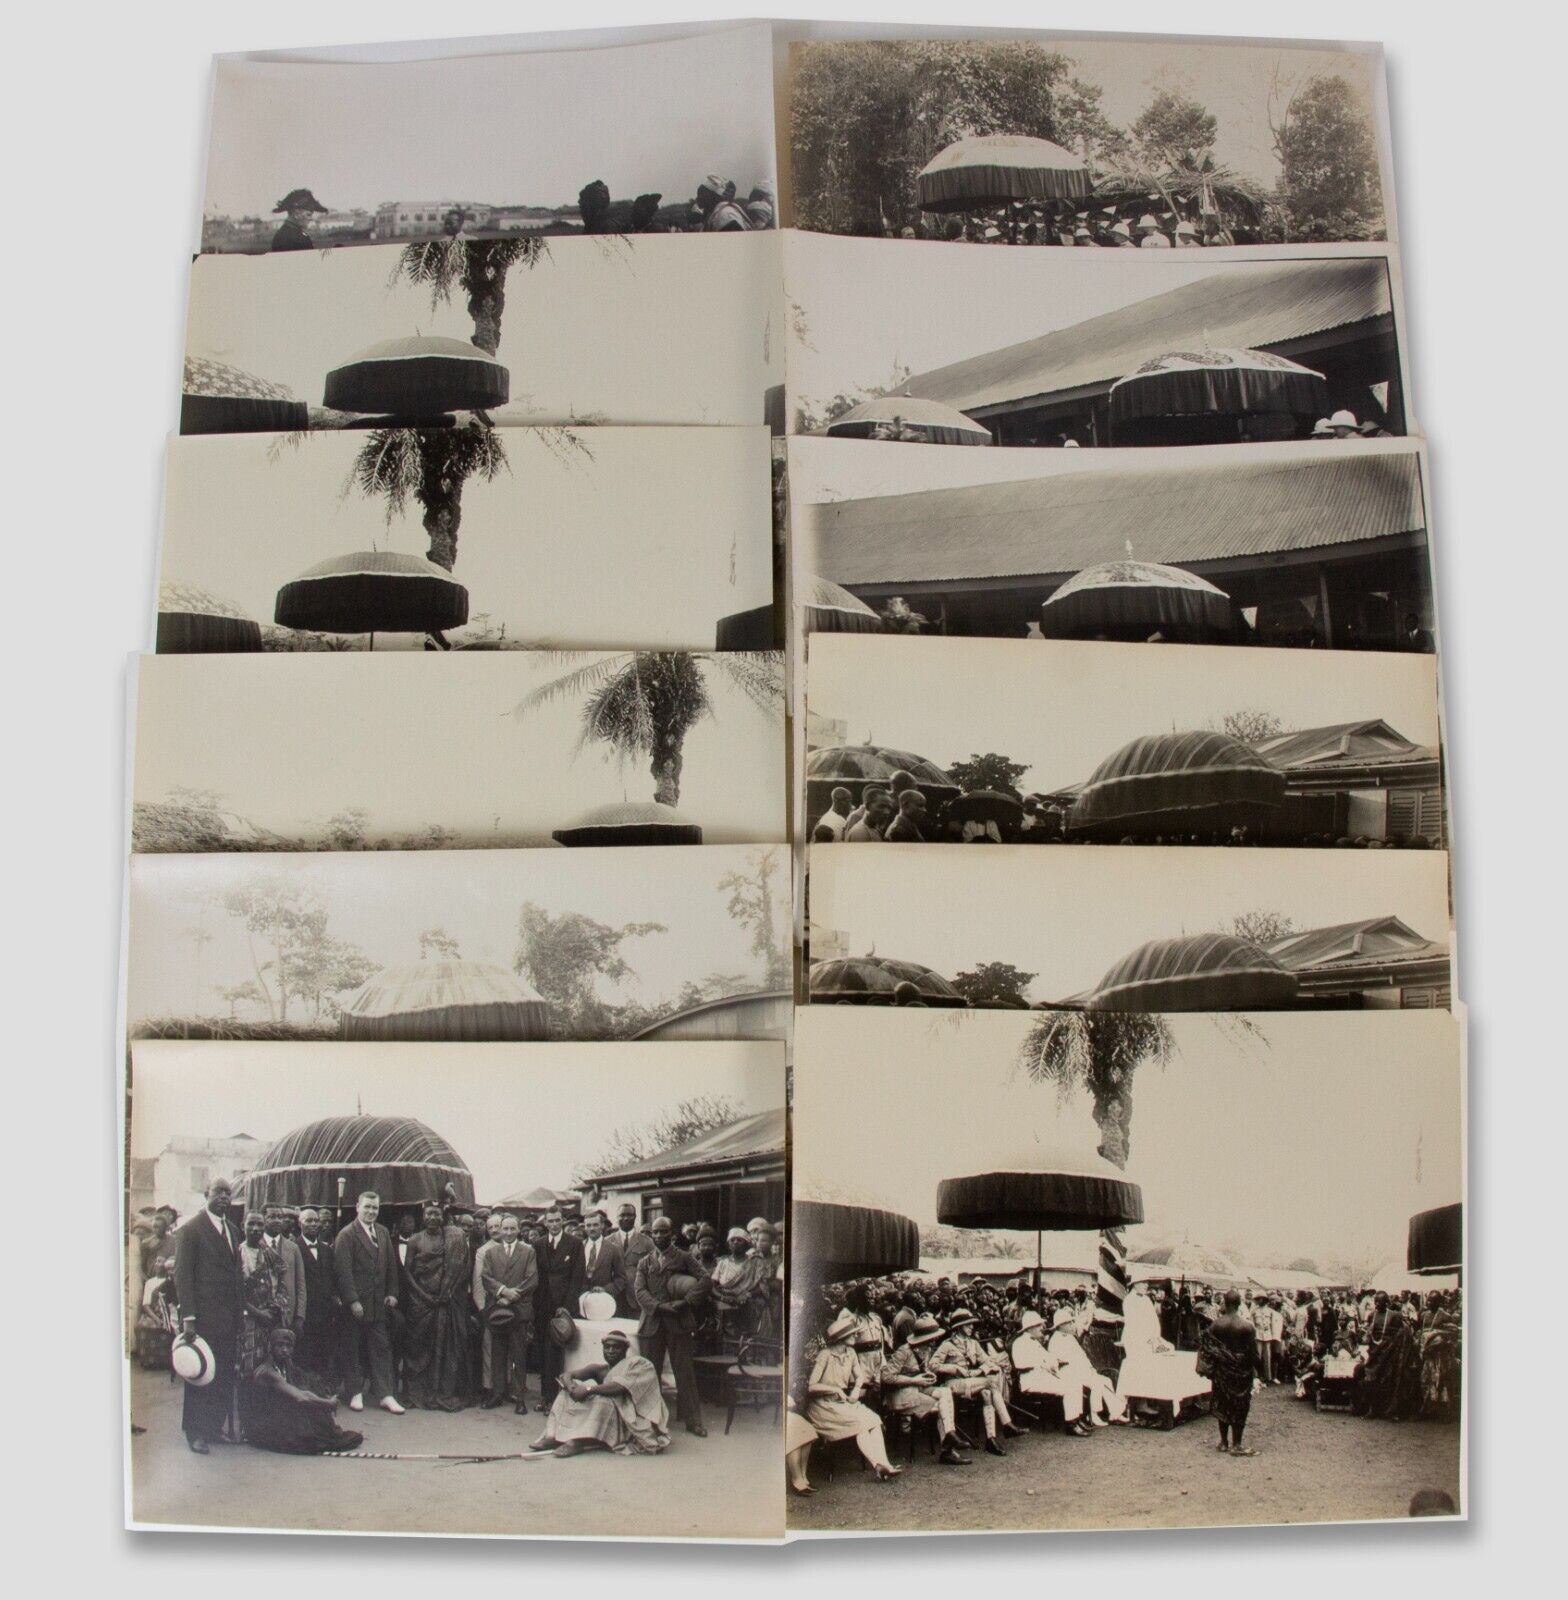 1920s West Africa Ashanti 12 superb original photographs of official functions